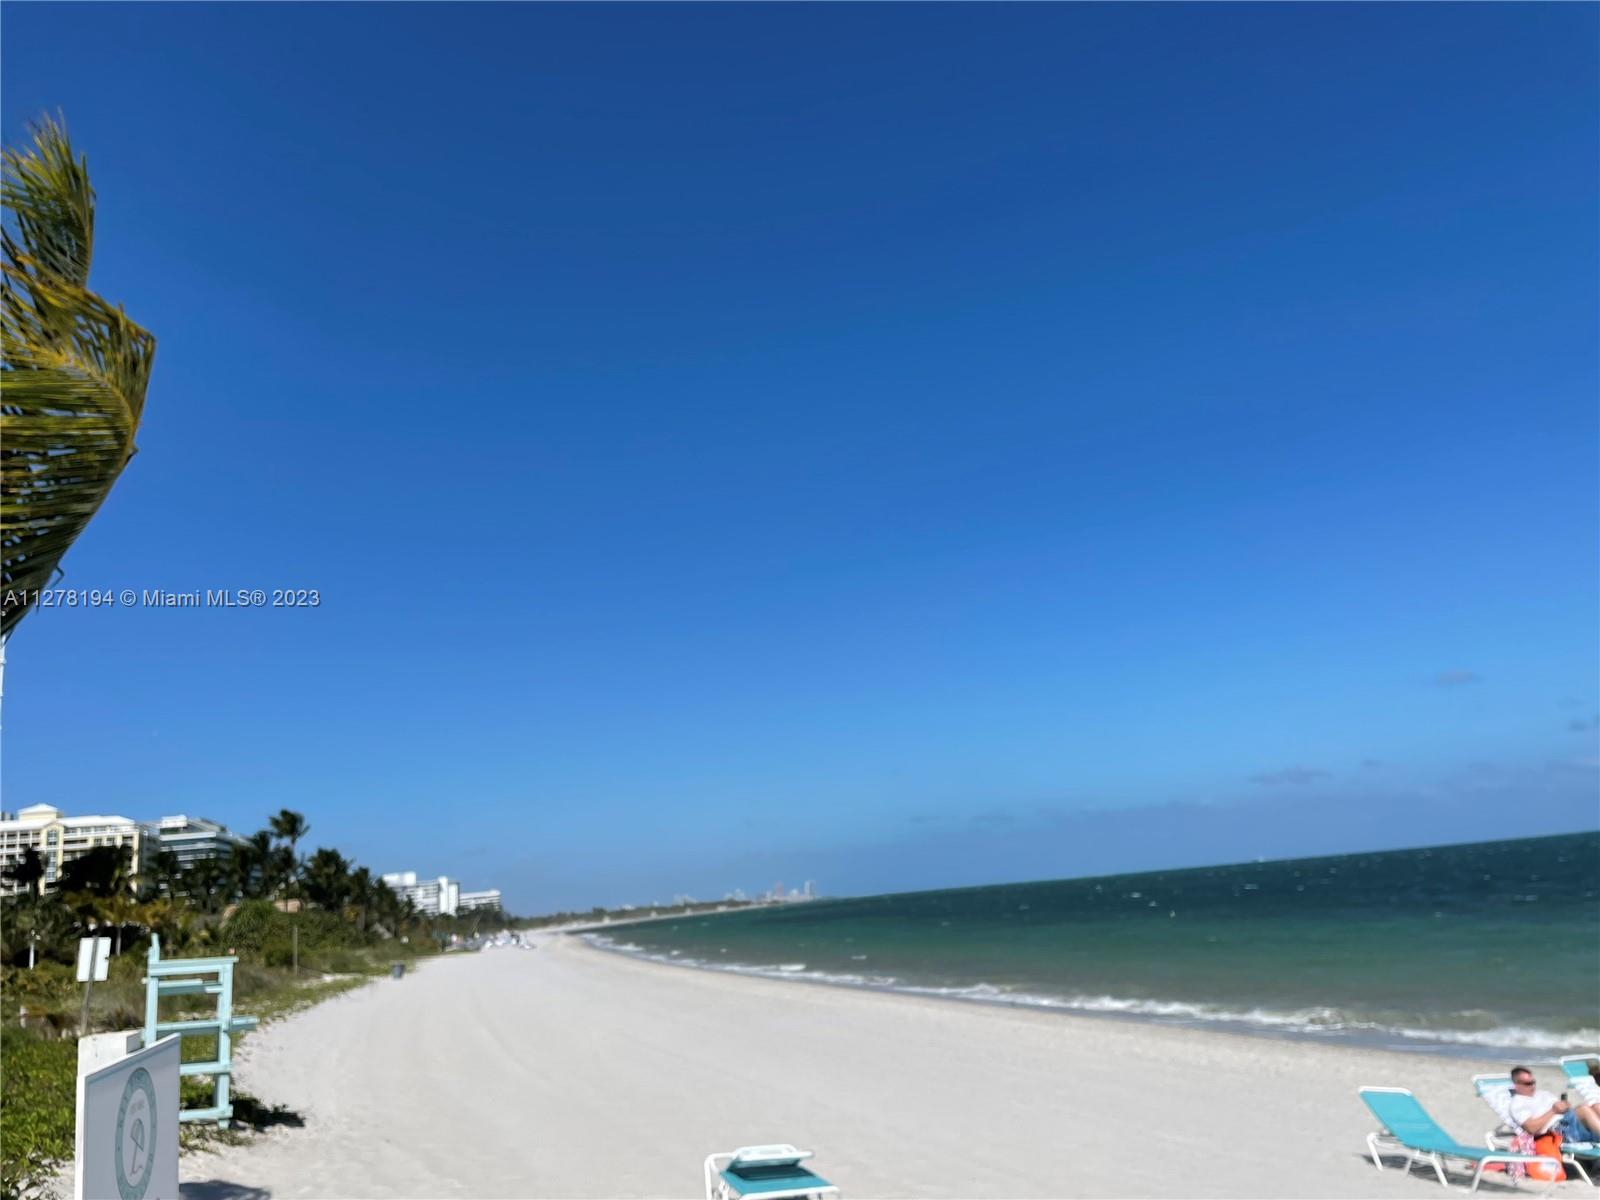 Key Biscayne Beach very close from the property.